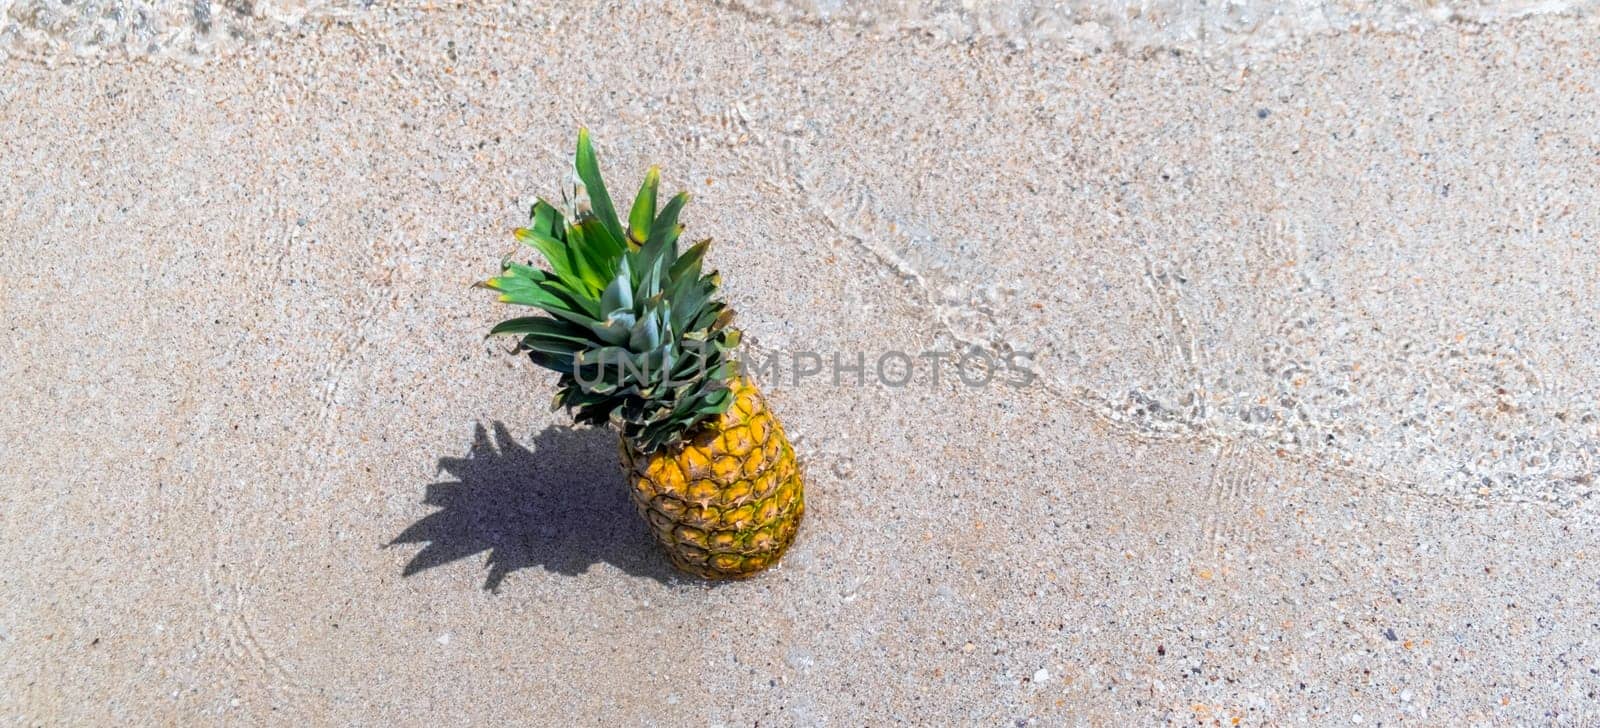 Fresh pineapple on the beach. Fruit in the sea waves. Summer vacation concept. by igor010